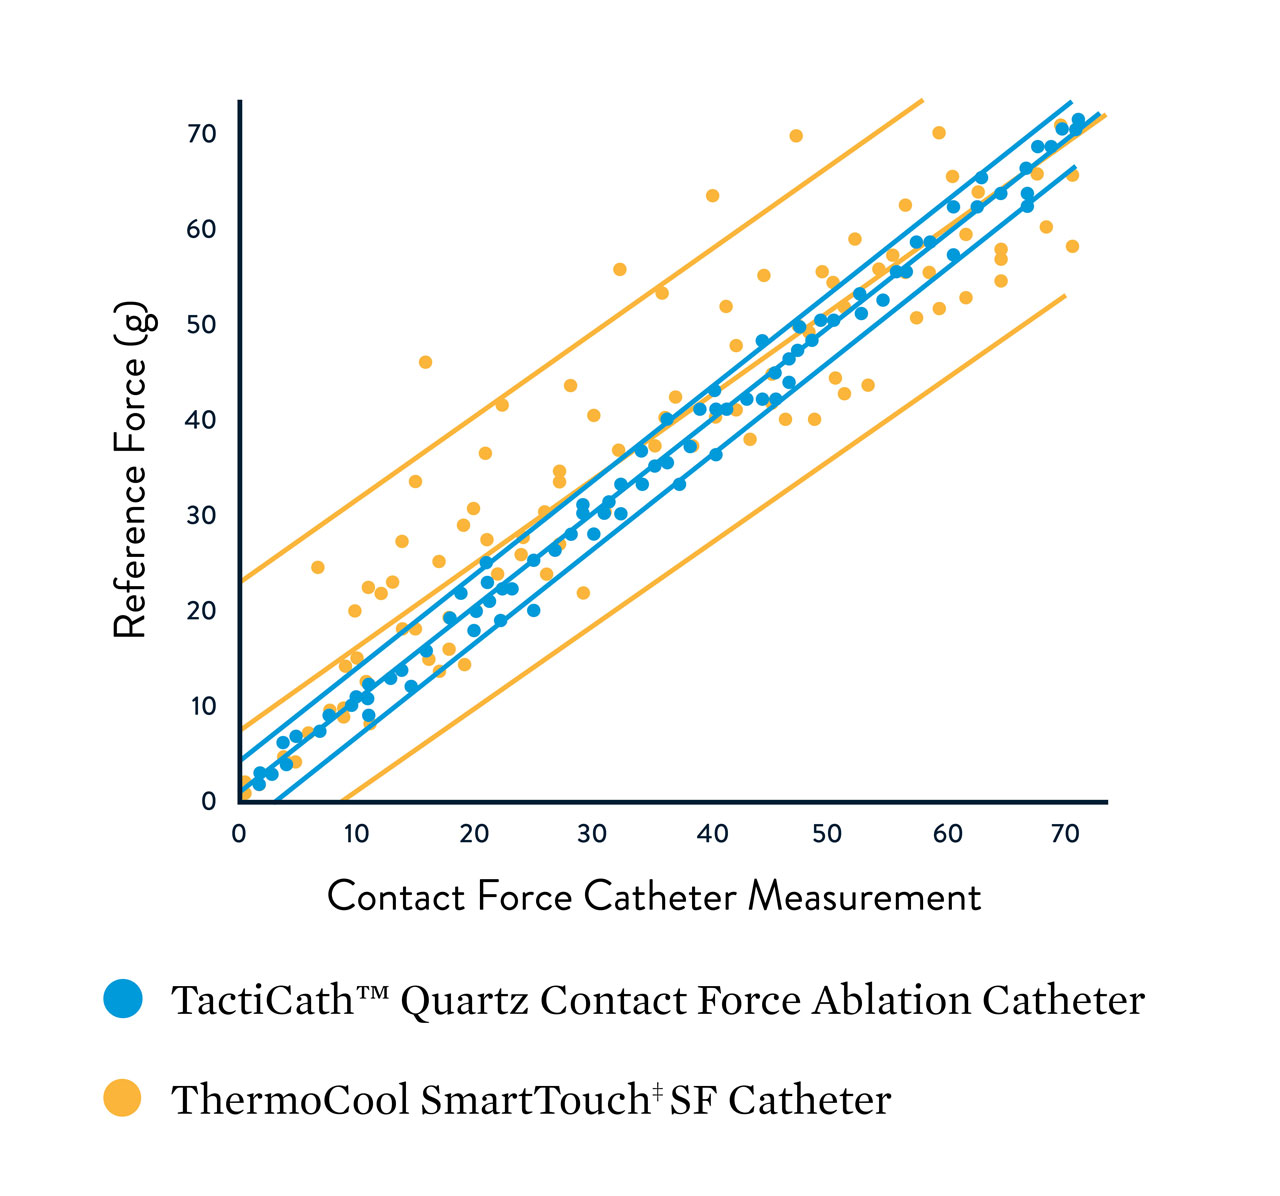 graphic showing the reference force relationship to the contact force catheter measurement